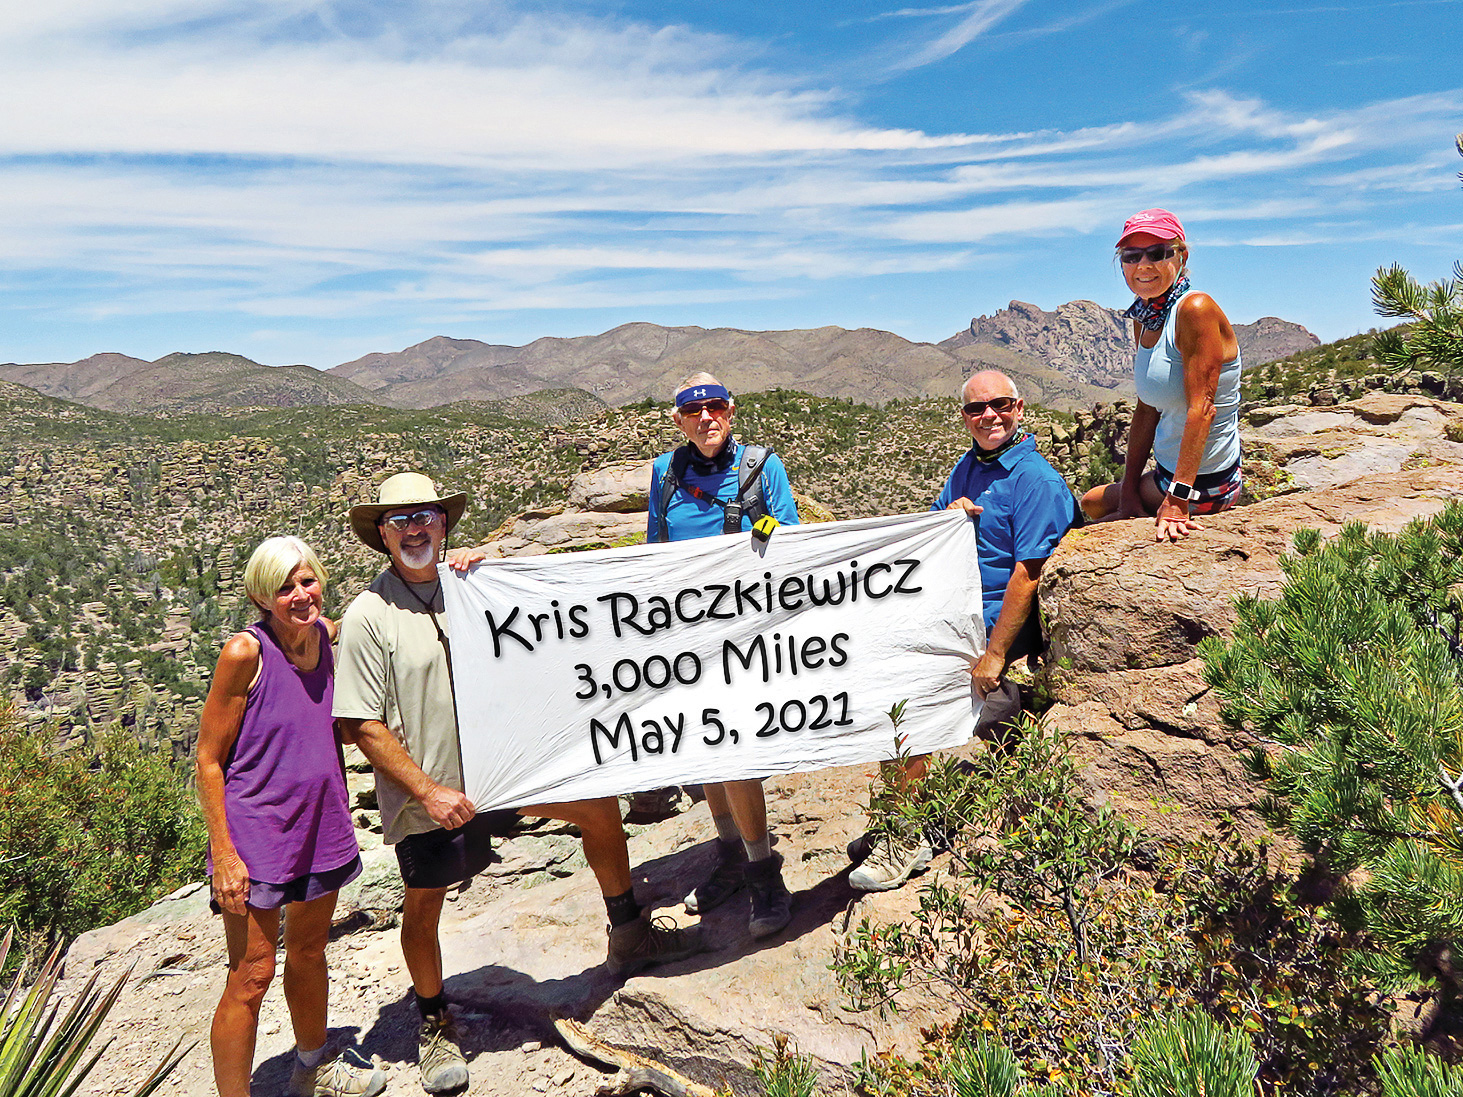 Left to right: Eileen and Leon Mosse, Lynn Warren (photographer), Neal Wring and Kris Raczkiewicz pause on Inspiration Point (with Cochise Head in the background) in the Chiricahuas to celebrate Kris’ achievement.